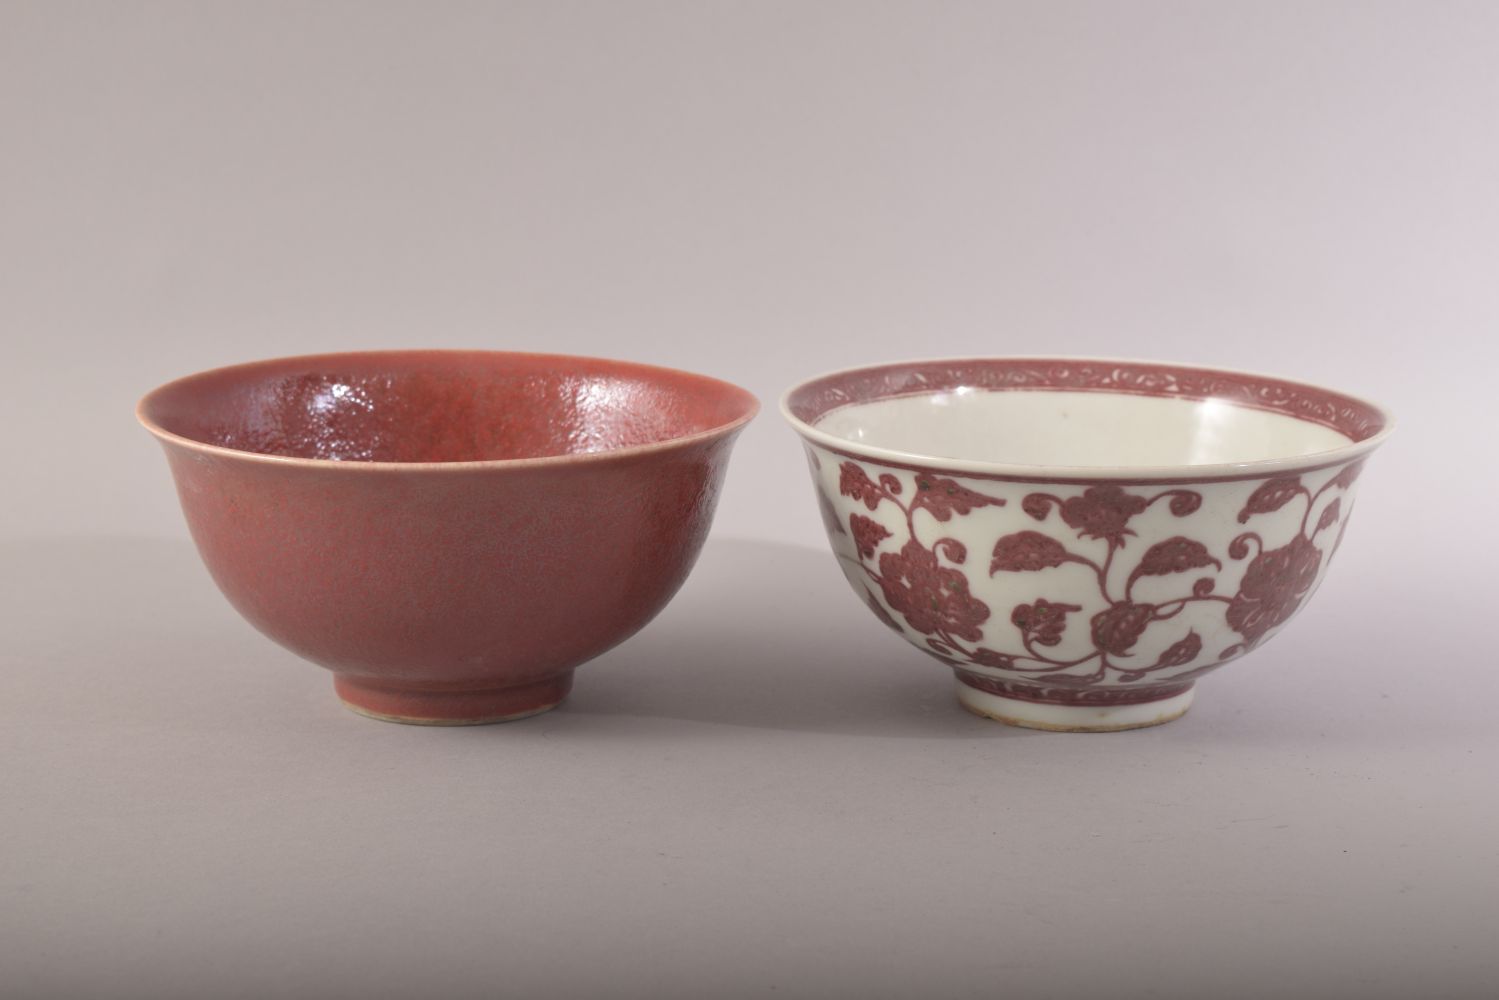 TWO CHINESE PORCELAIN BOWLS, one with red and white floral decoration, the other with red - Image 2 of 7